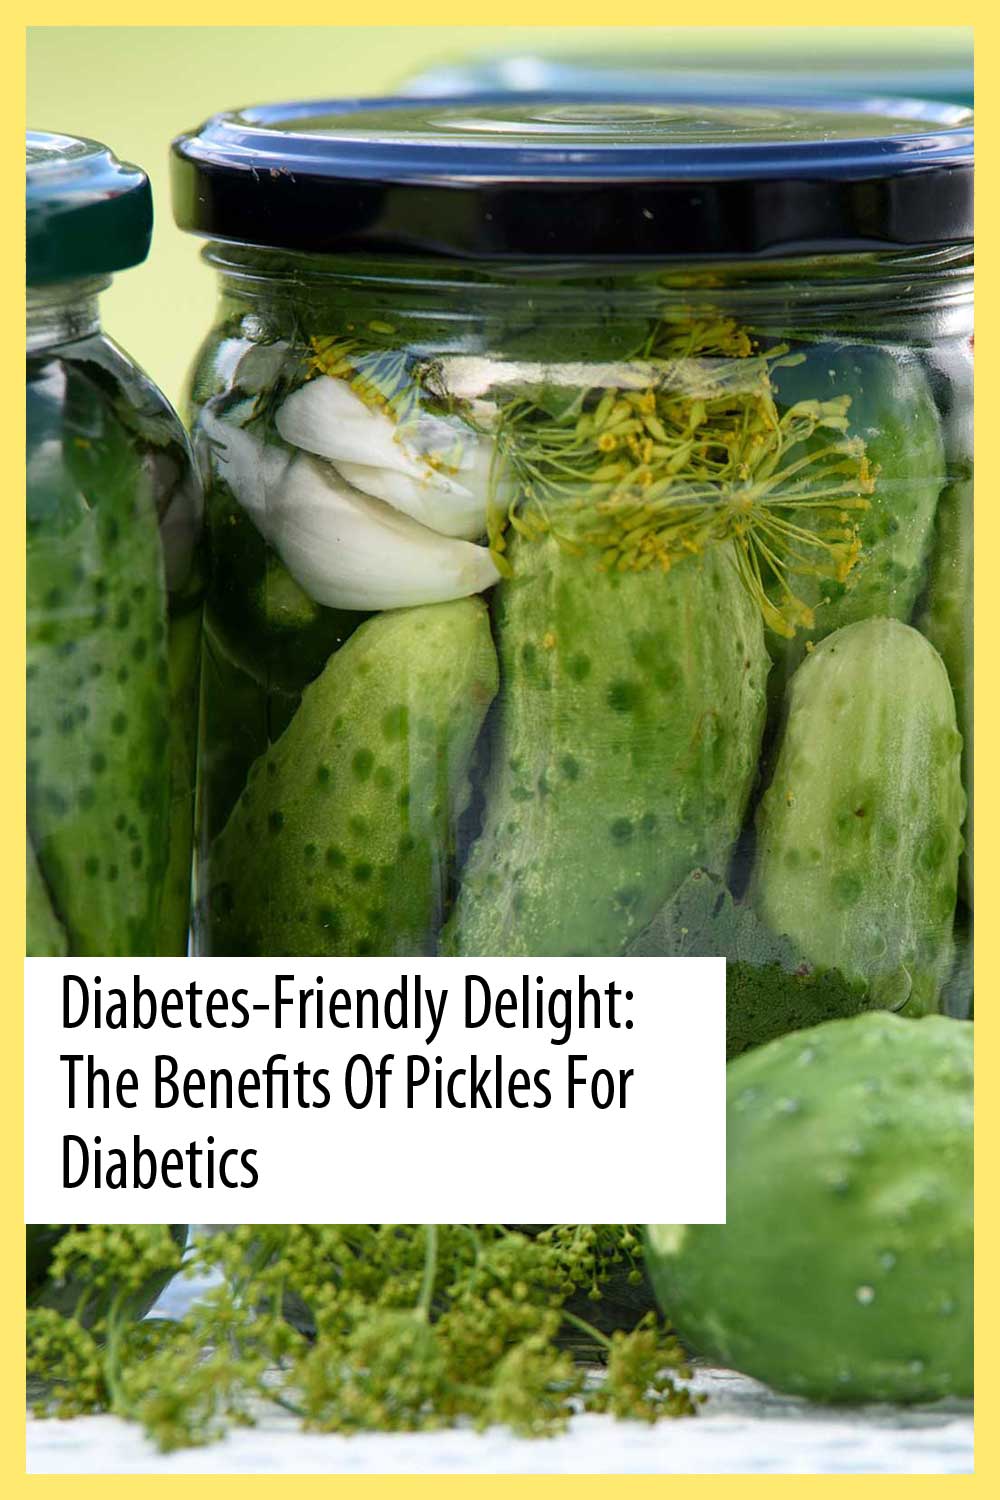 Diabetes-Friendly Delight: The Benefits of Pickles for Diabetics